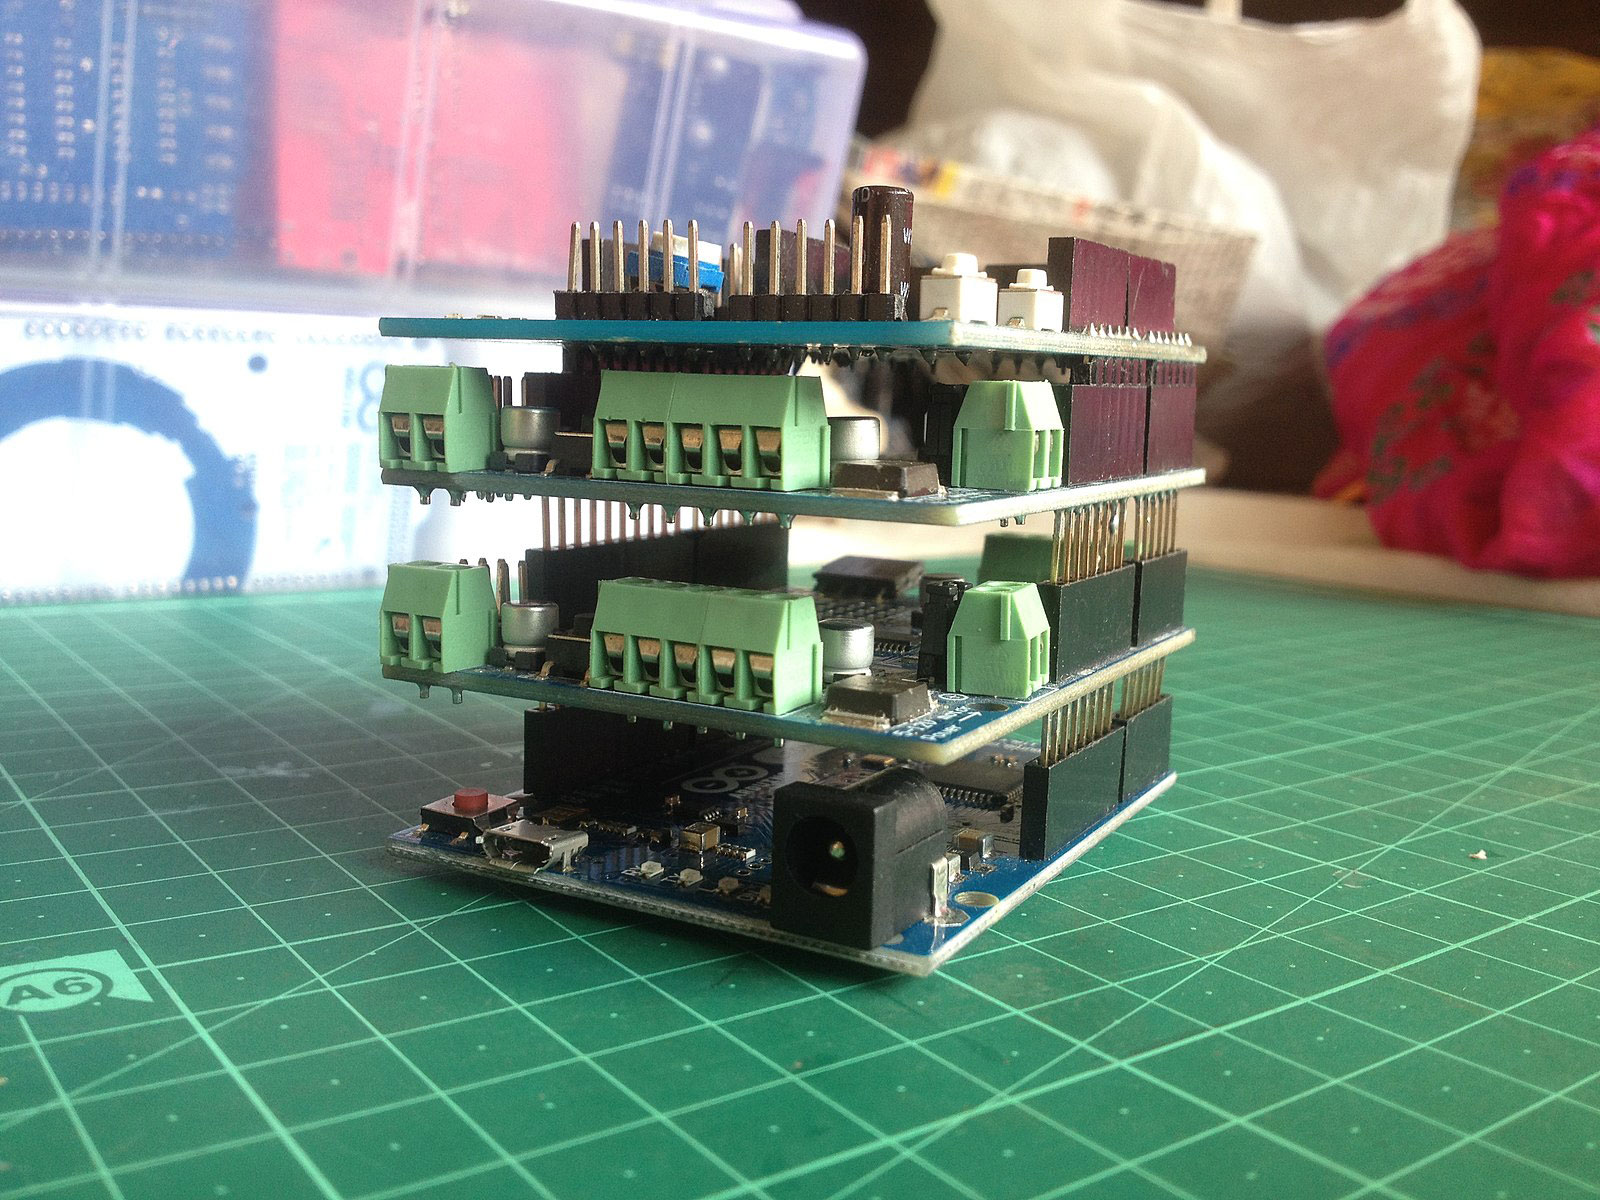 An Arduino board with multiple shields stacked on it